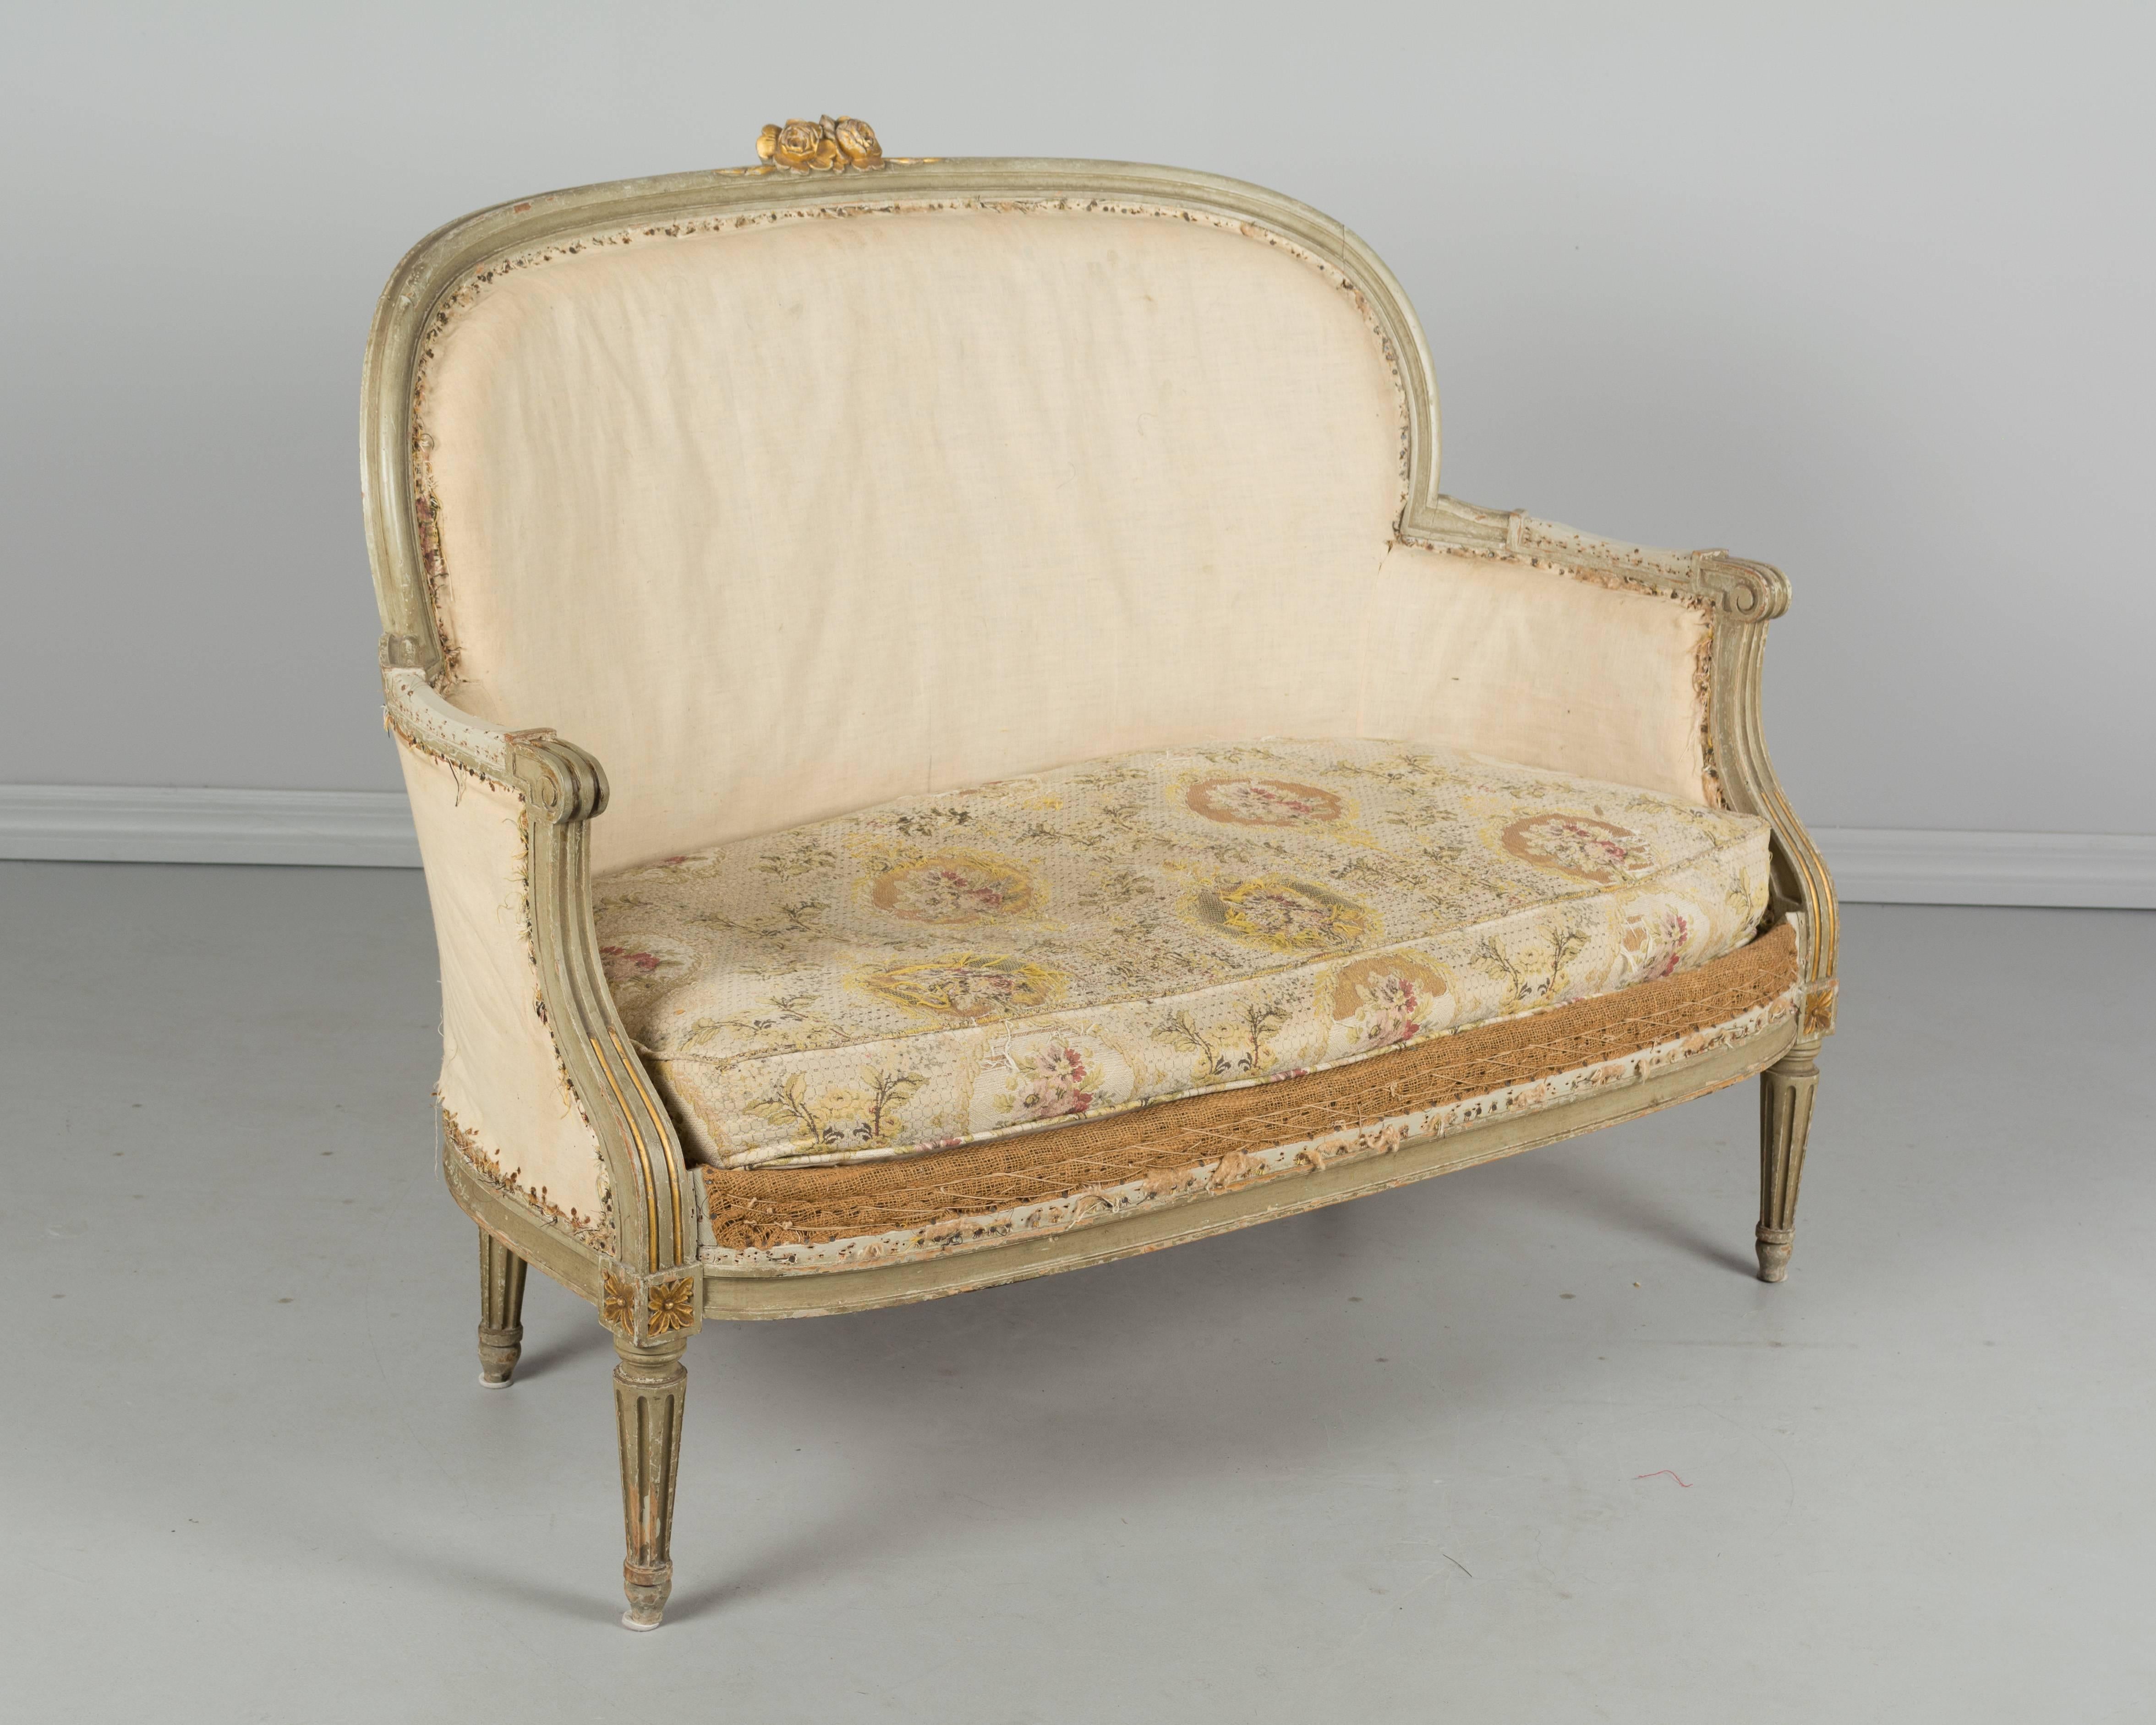 A 19th century Louis XVI style canapé or small sofa. Original verdigris painted finish with carved details and gilt accents. Sturdy with nice proportions. The right arm has been restored. The original upholstery has been partially stripped. Sold as